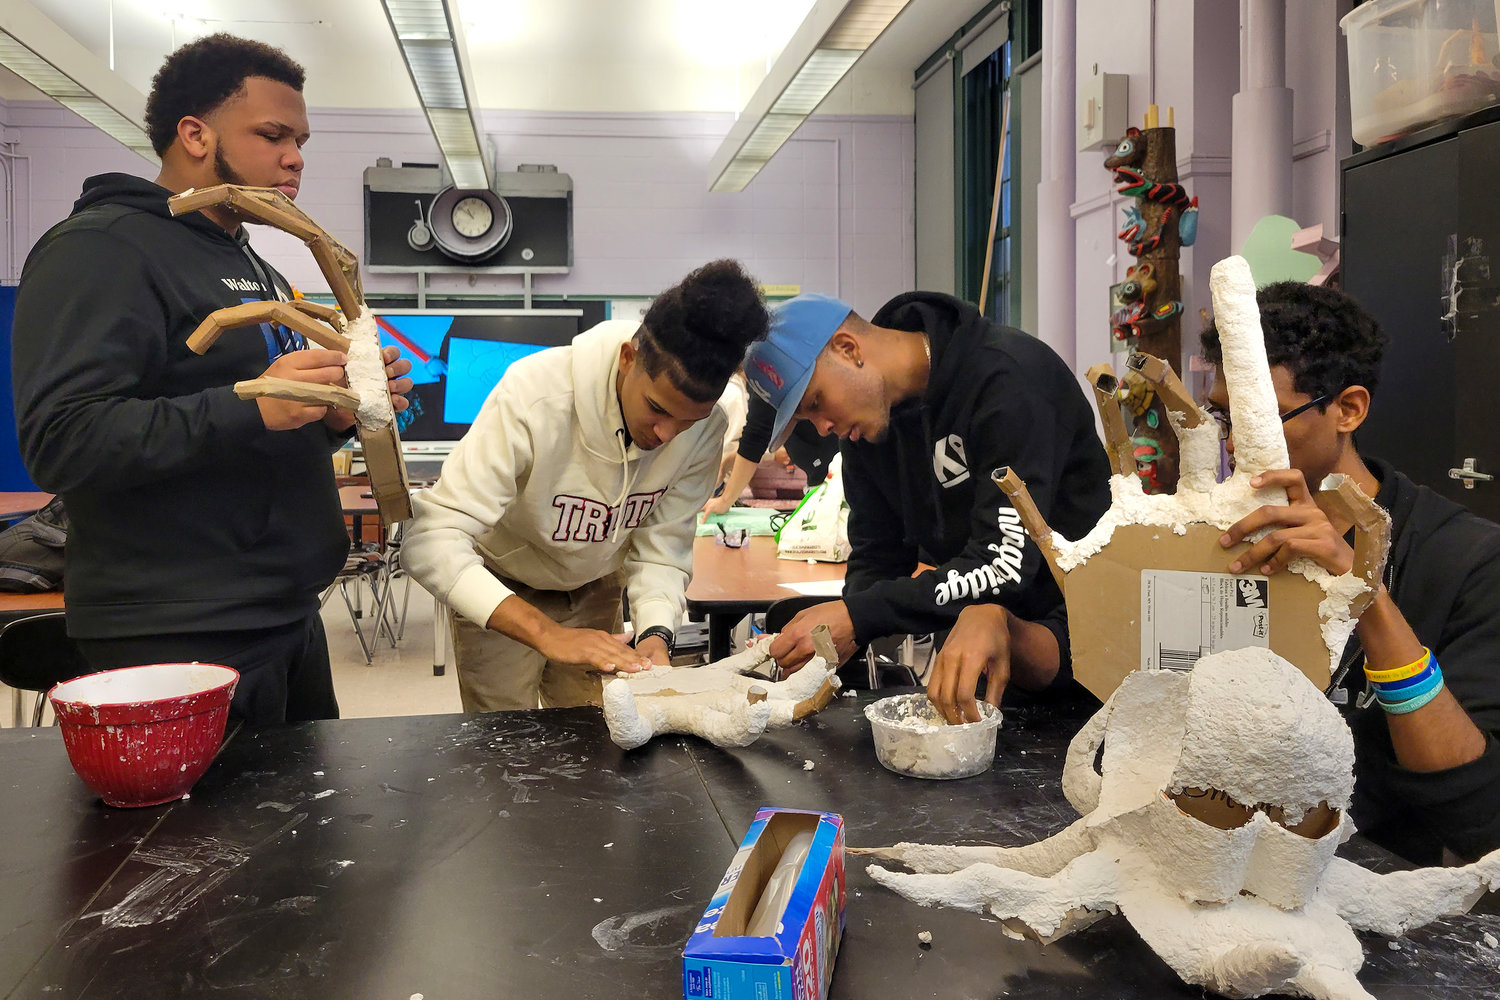 Kingsbridge International High School students along with three teachers, one including visual art teacher Bob Hechler, created puppets out of clay and other recyclables.